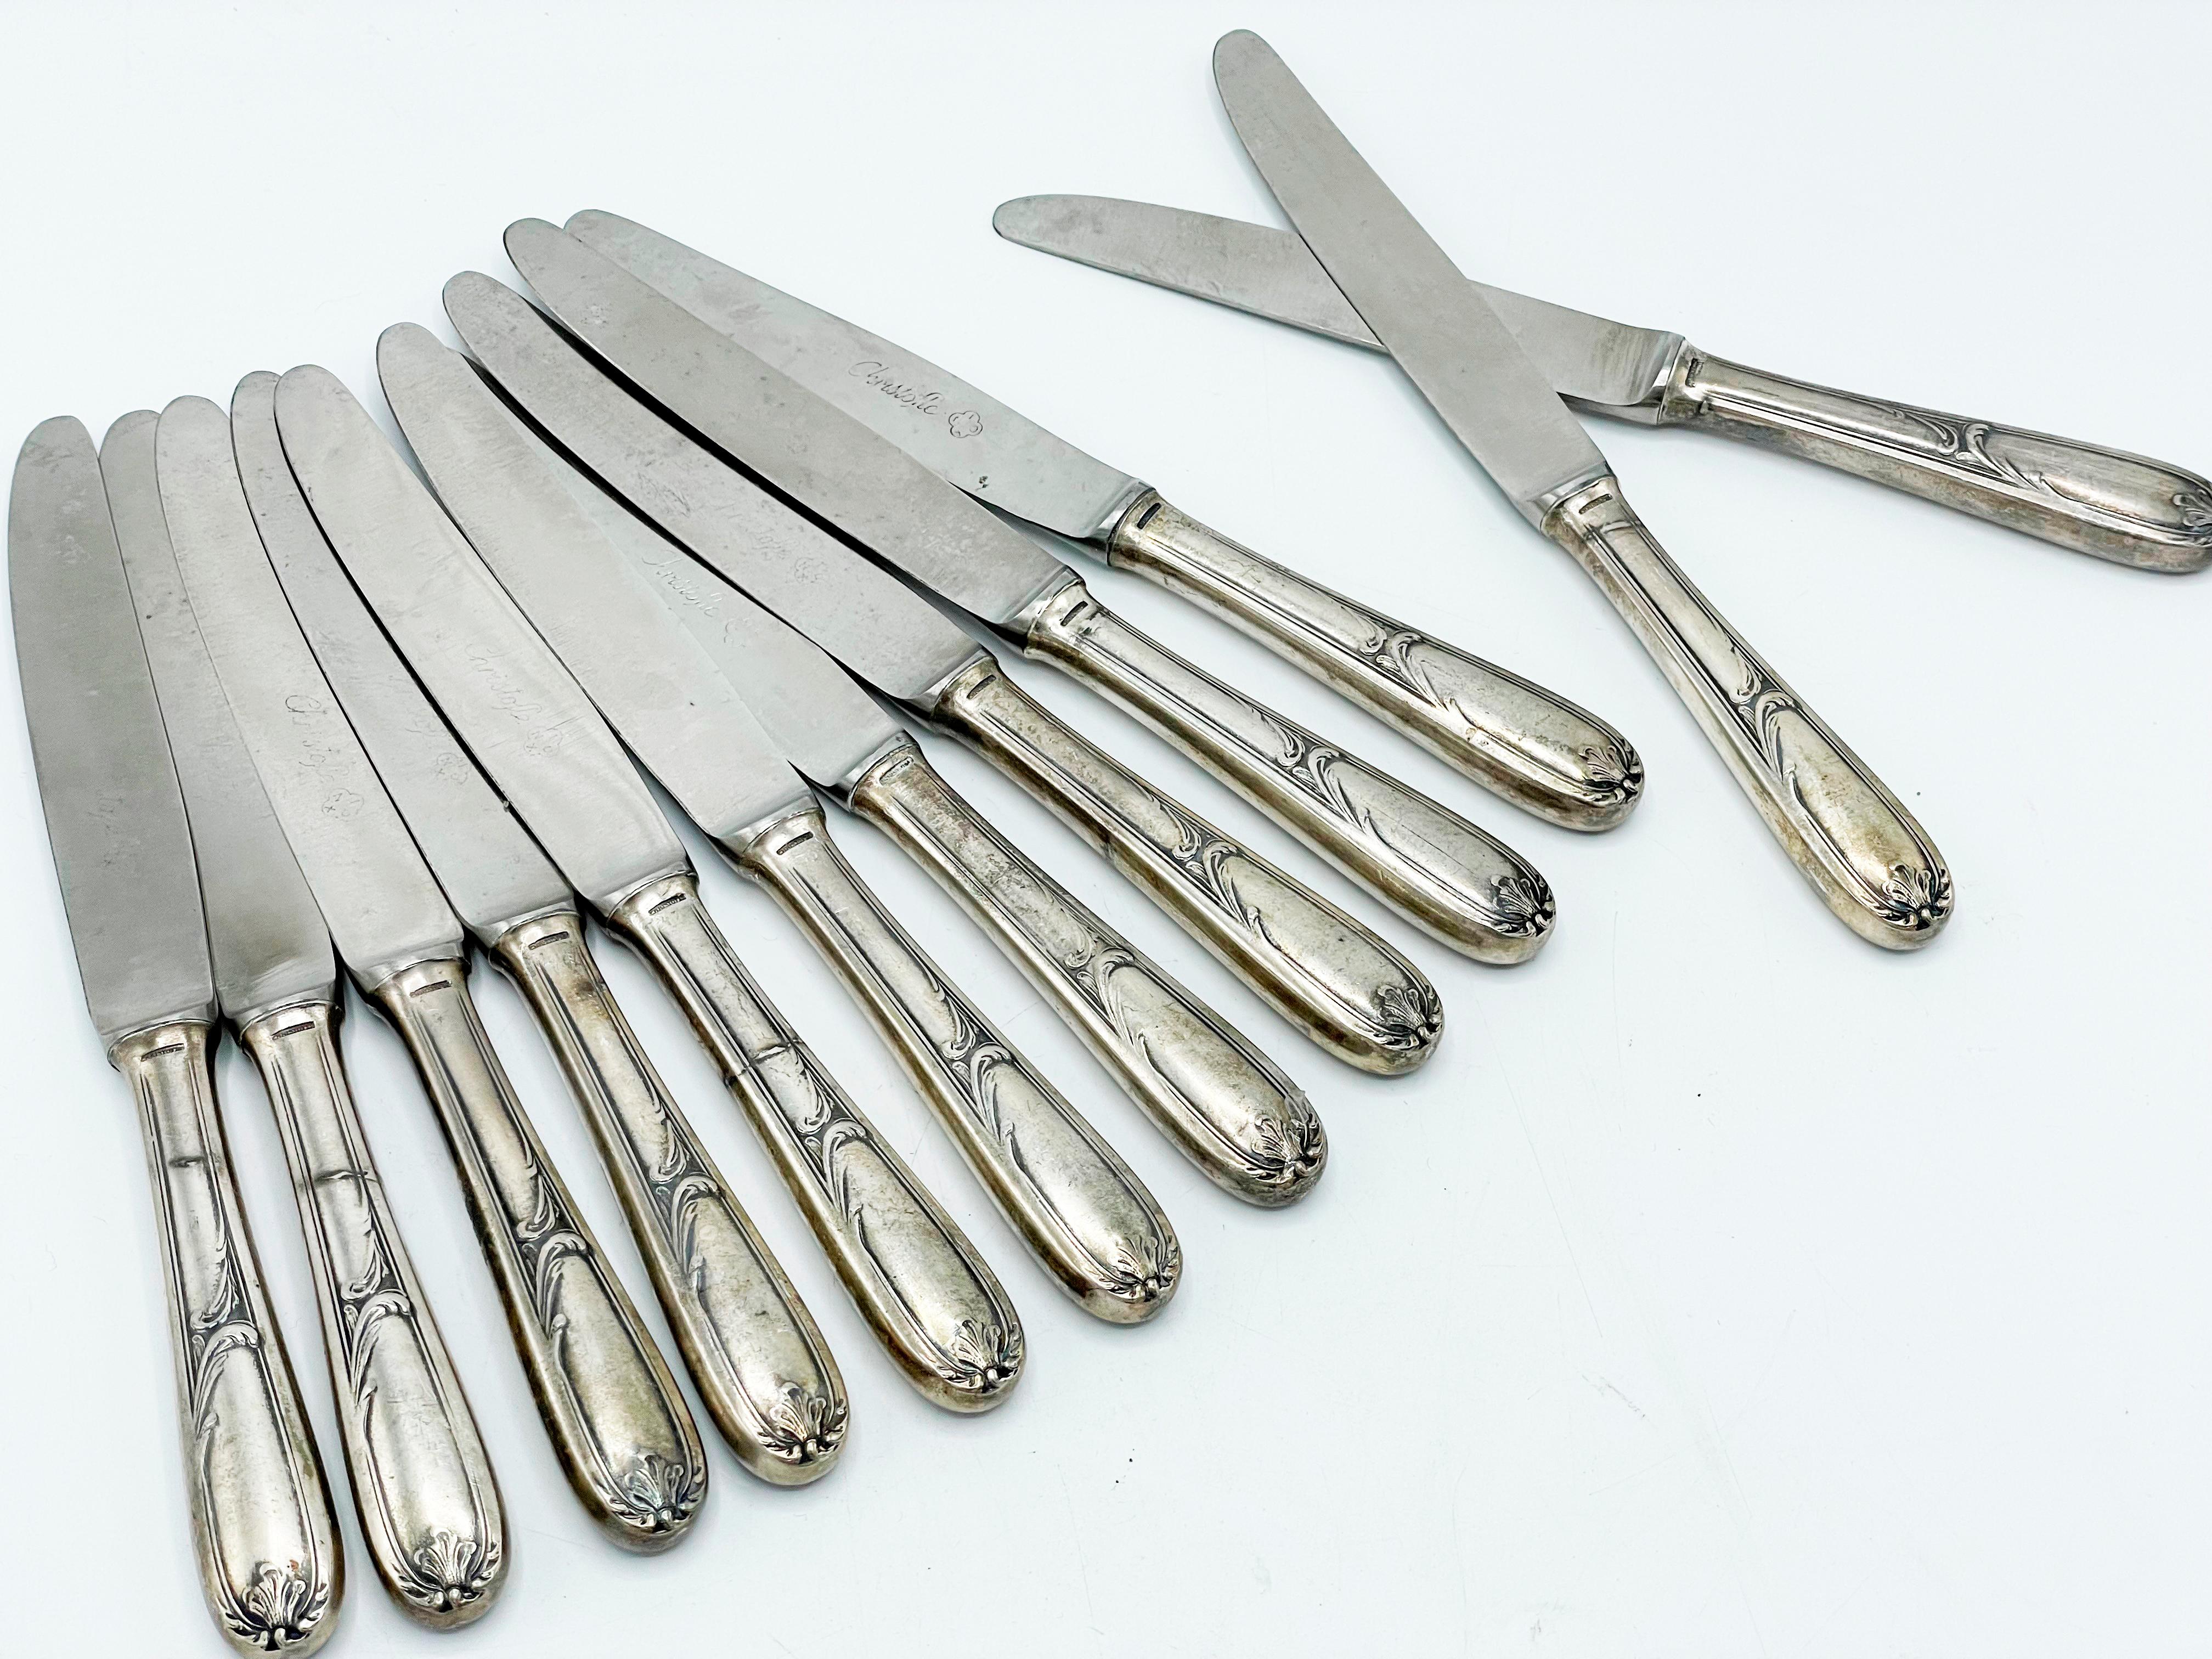 Christofle Made in Argentina, Flatware art nouveau in Silverplated 5